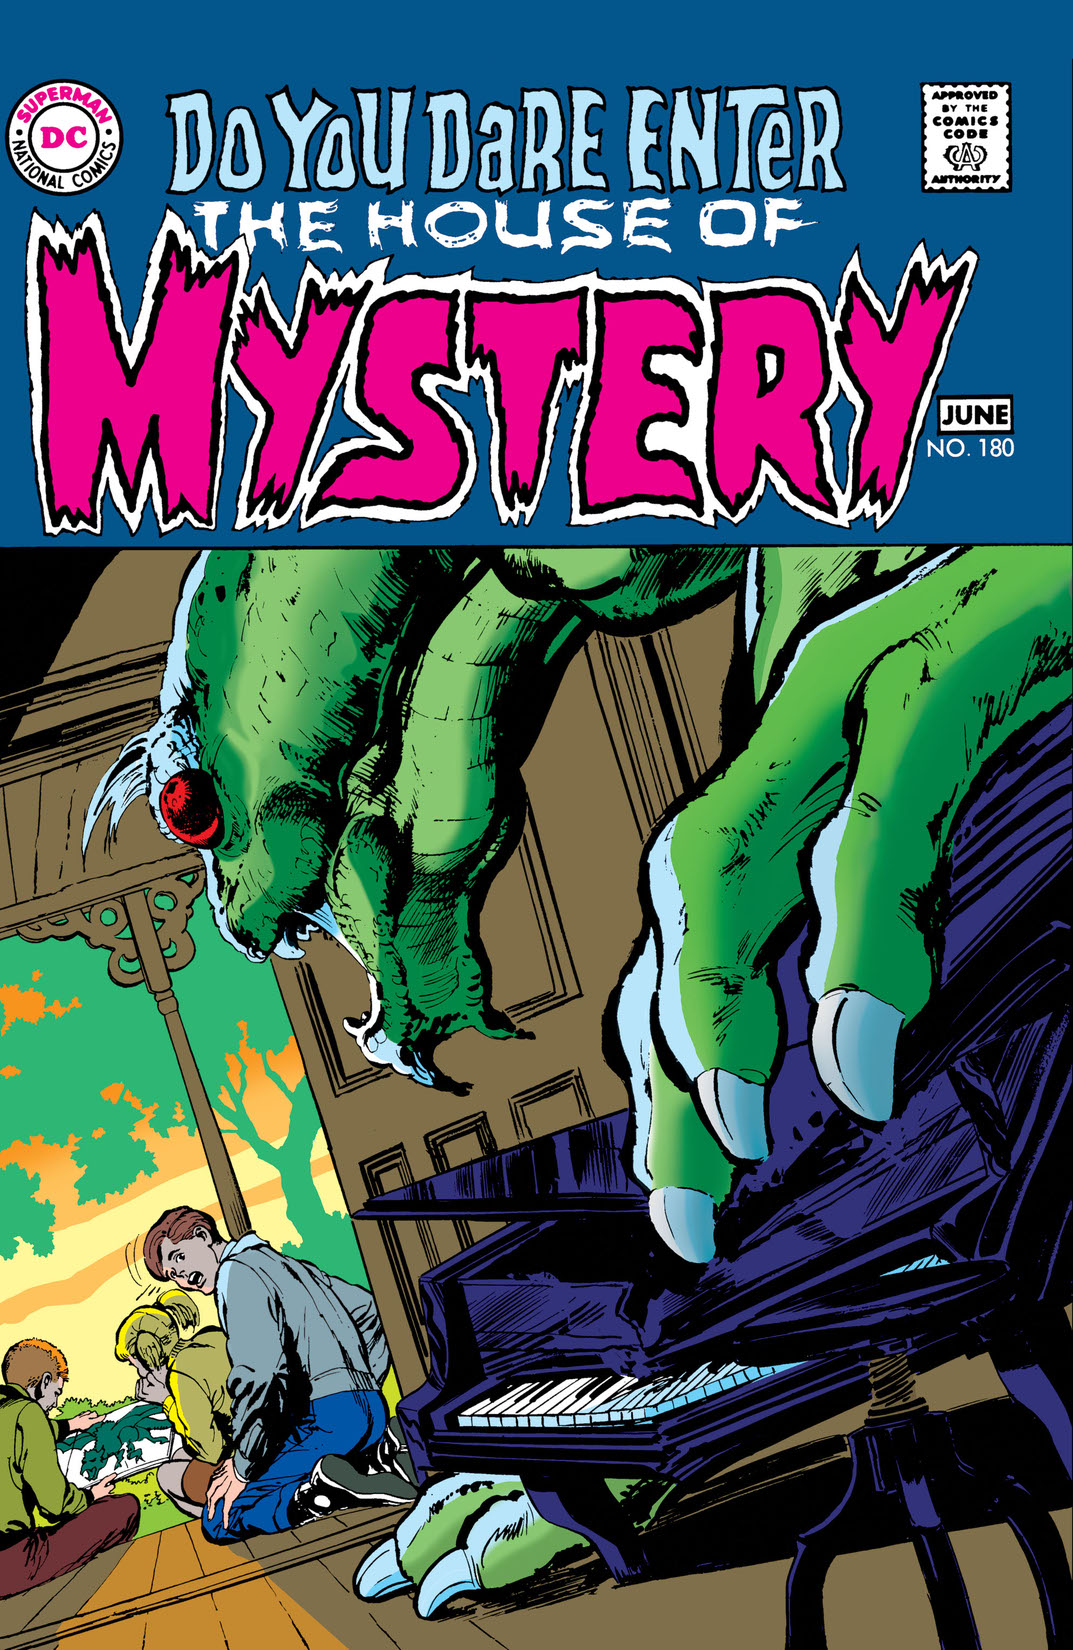 House of Mystery (1951-) #180 preview images